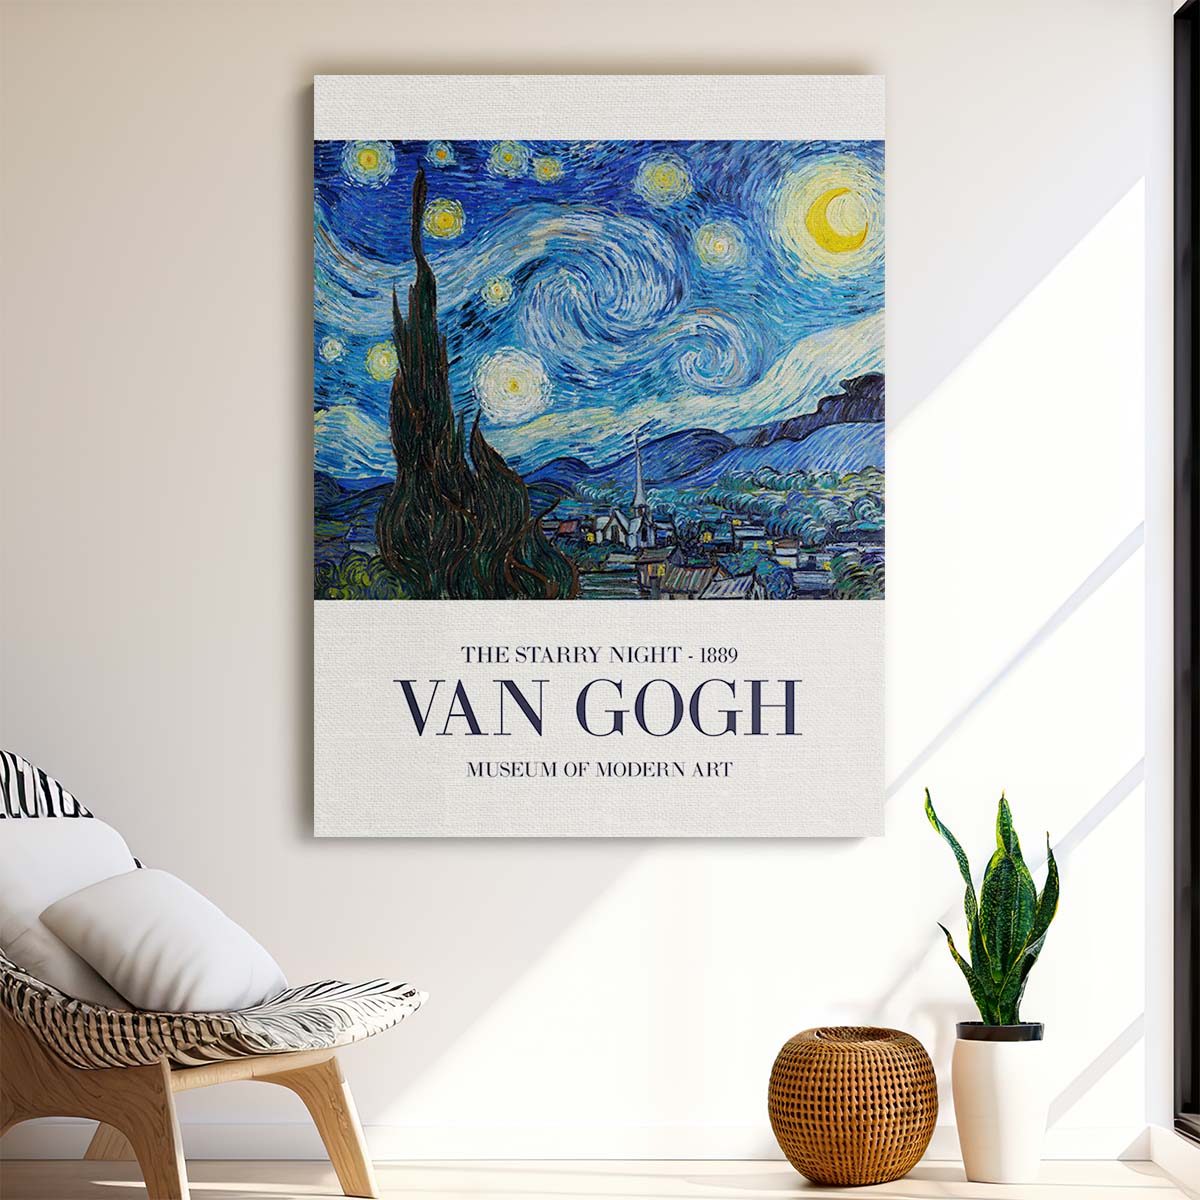 Vincent Van Gogh Starry Night Acrylic Oil Painting Poster by Luxuriance Designs, made in USA